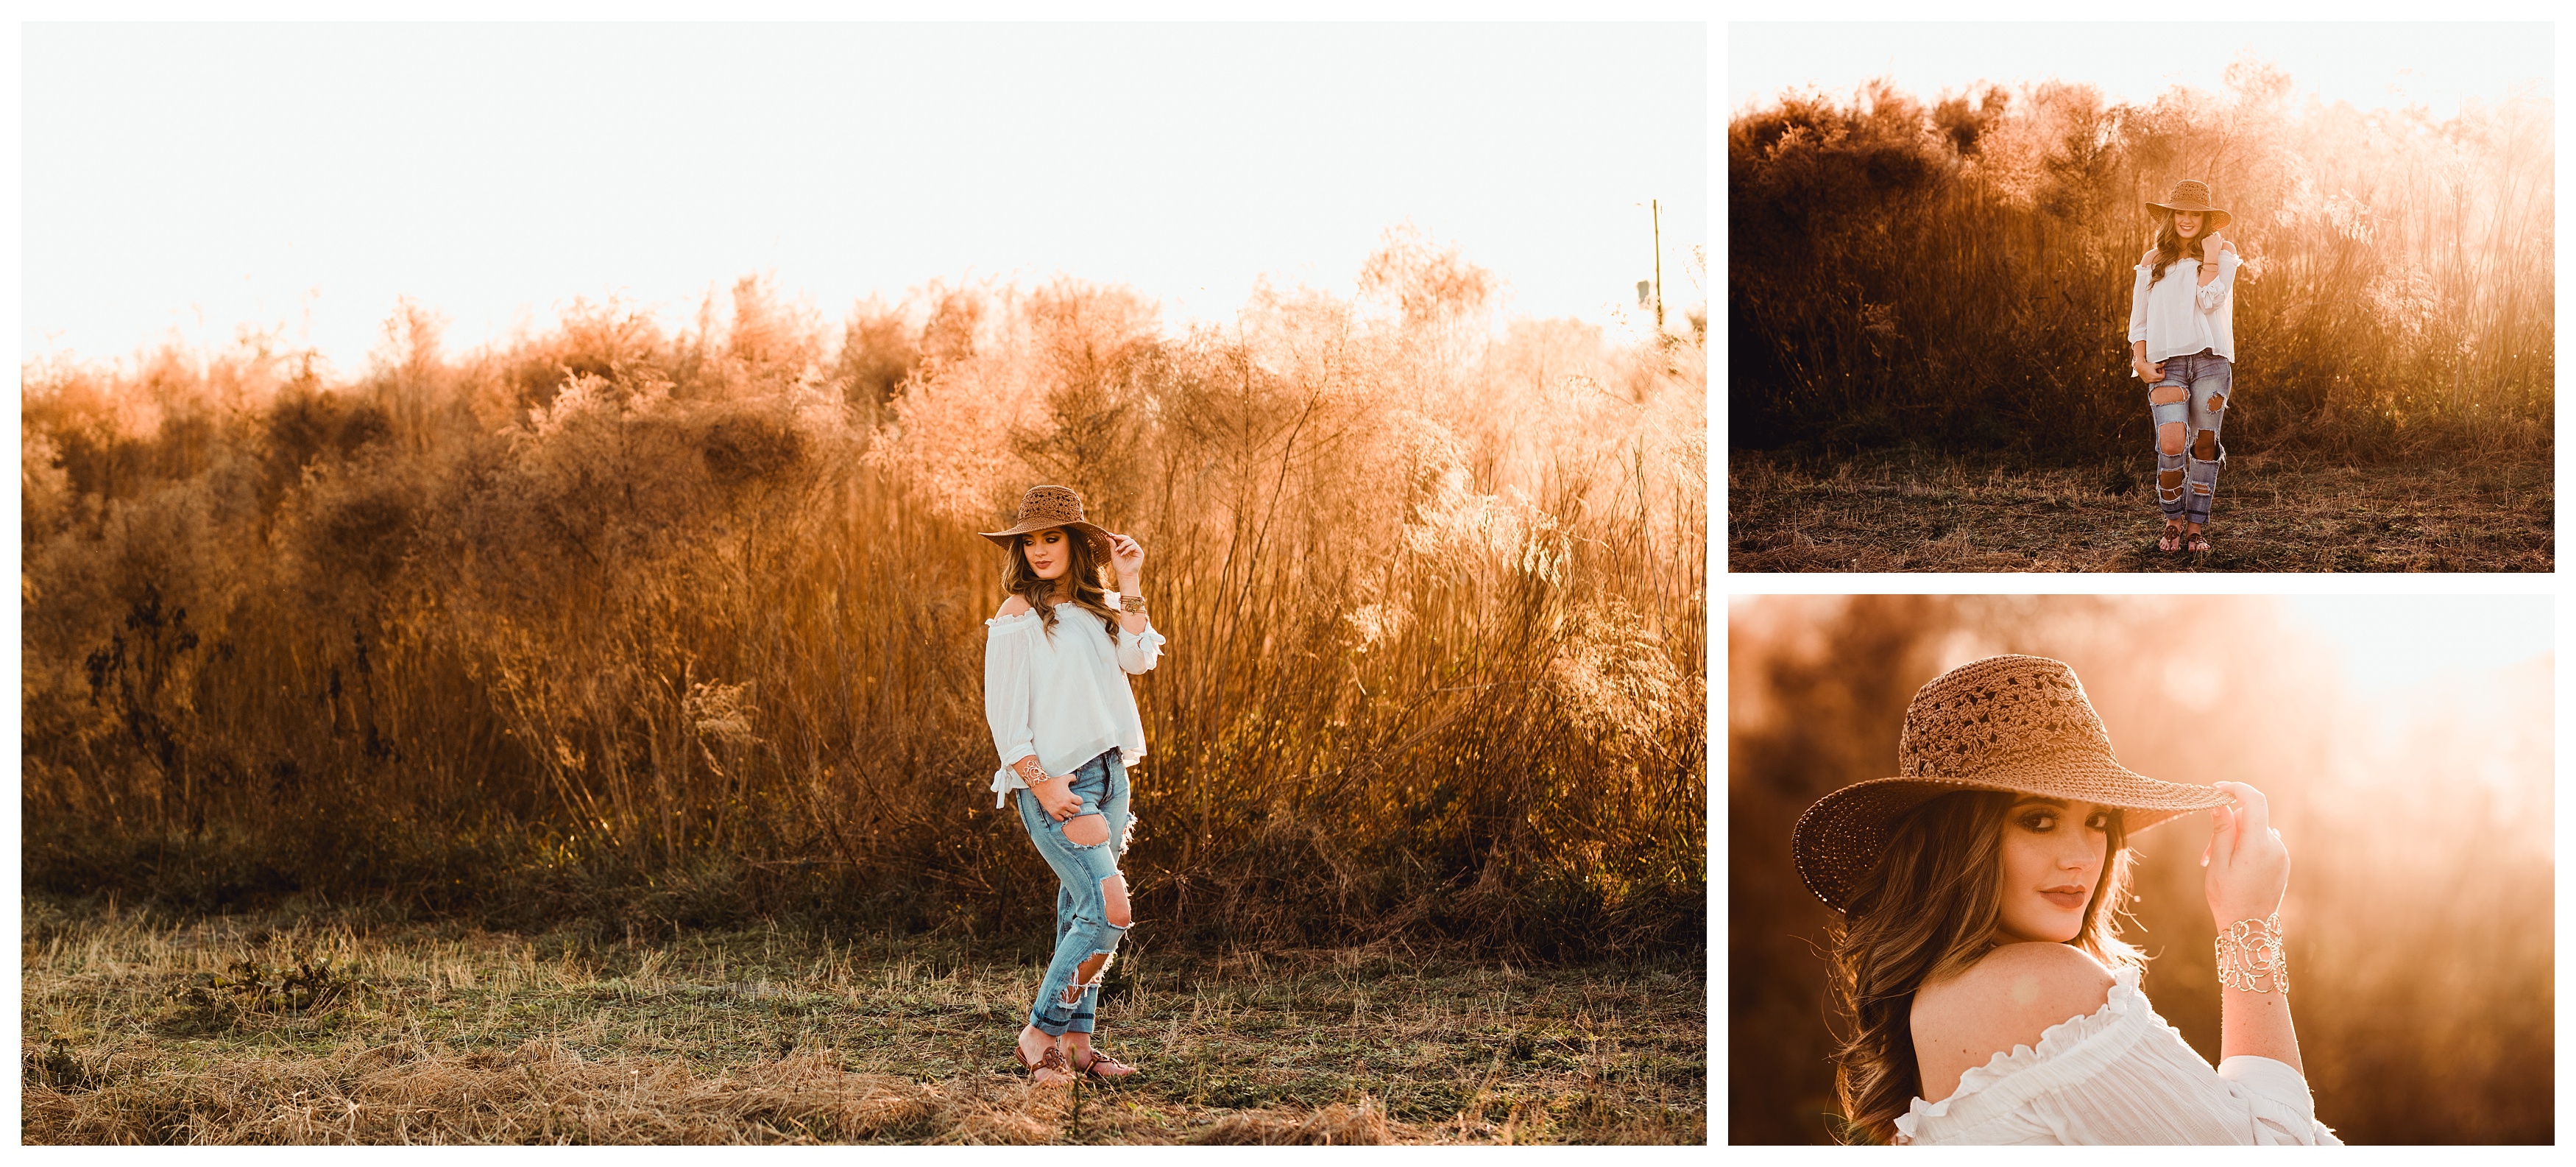 Golden hour senior photography in Florida with beautiful orange sunlight. Shelly Williams Photography